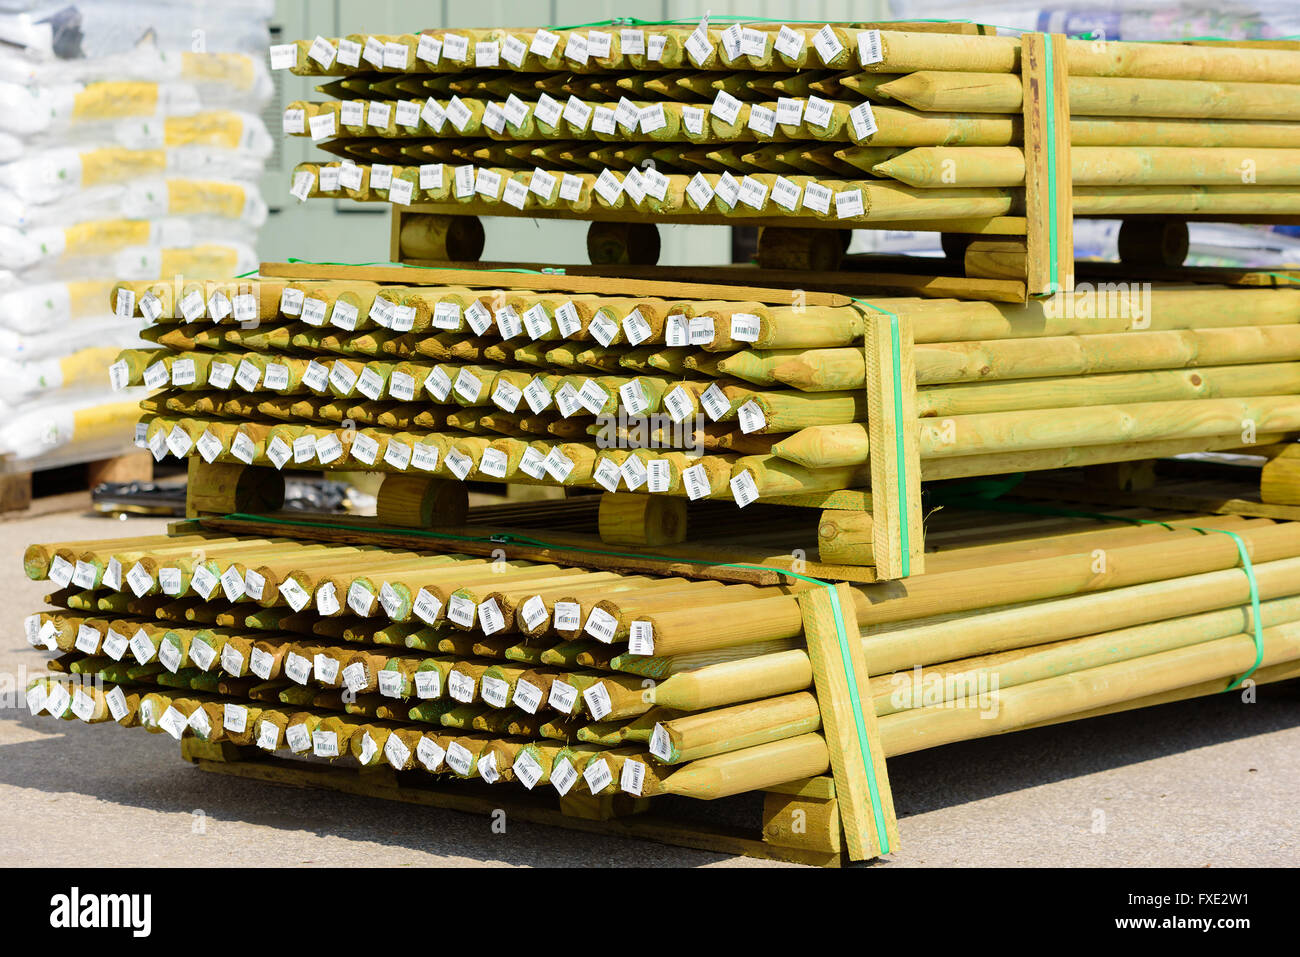 Lyckeby, Sweden - April 7, 2016: Stack of green pressure impregnated wooden poles with barcode price tags at the ends, at a publ Stock Photo